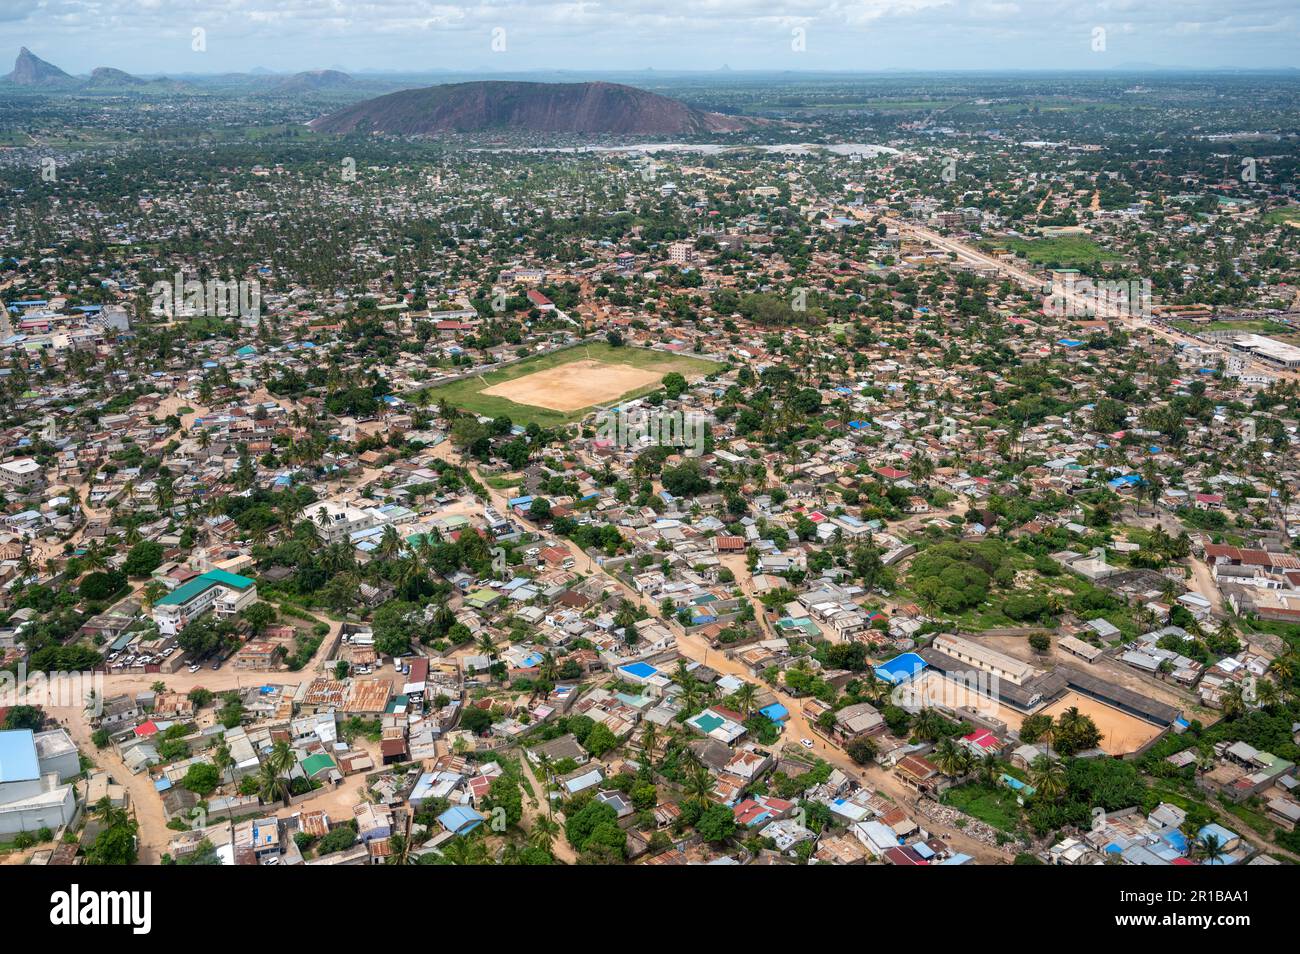 Nampula city, Mozambique in East Africa seen from the air Stock Photo